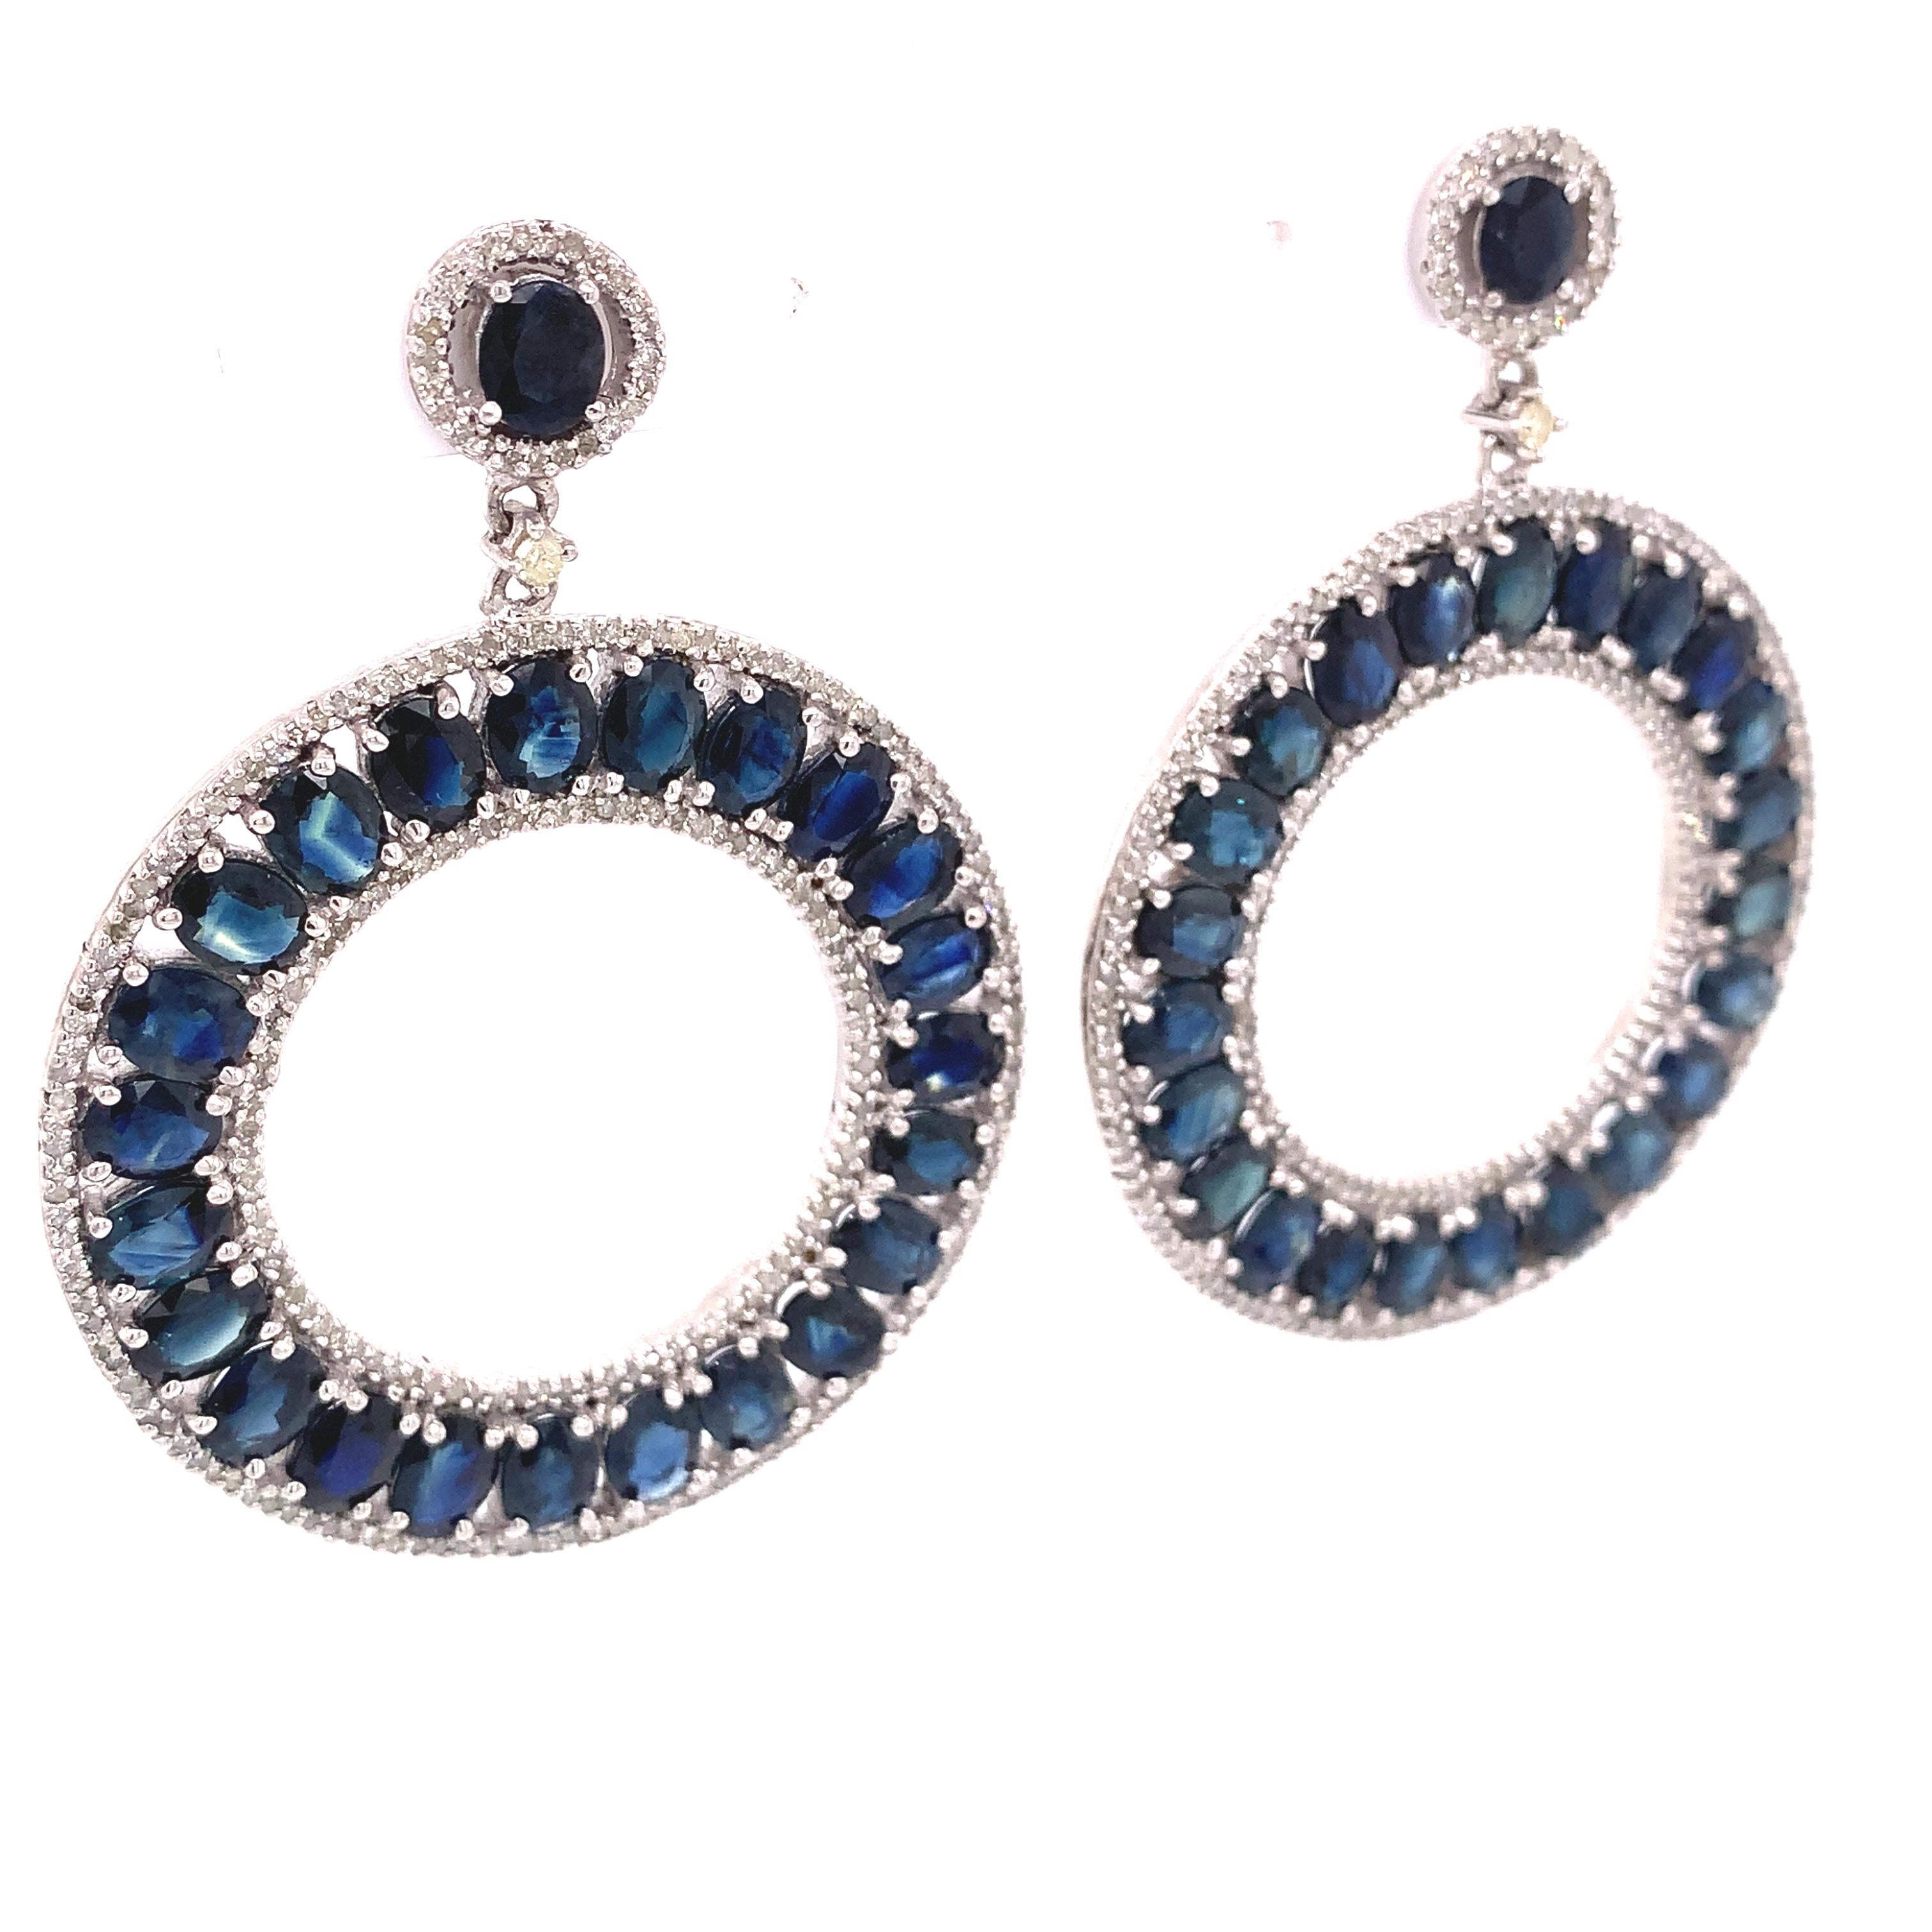 Life In Color Collection 

Blue Sapphires and accent Diamonds in these drop circle earrings set in sterling silver and 14K gold plated.

Blue Sapphire: 20.50ct total weight.
Diamonds: 2.01ct total weight.